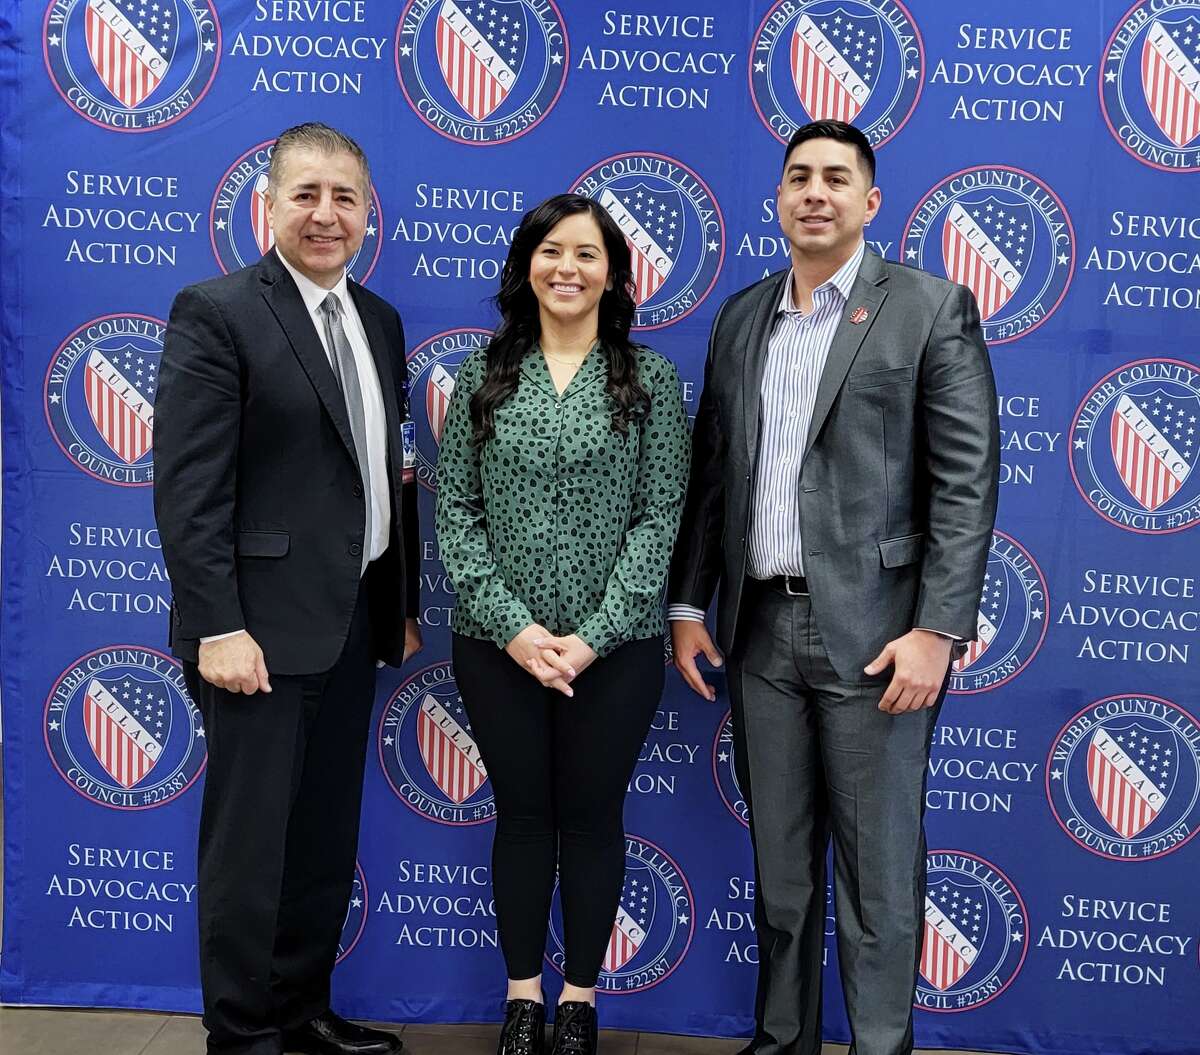 UISD Superintendent David Gonzalez, 550 Pizzeria owner Janet Zapata and L&F Distributors, represented by GM Jaime Mendiola, were each winners at the 2023 Orgullo Latino Legacy Awards for LULAC Council #22387 this week.